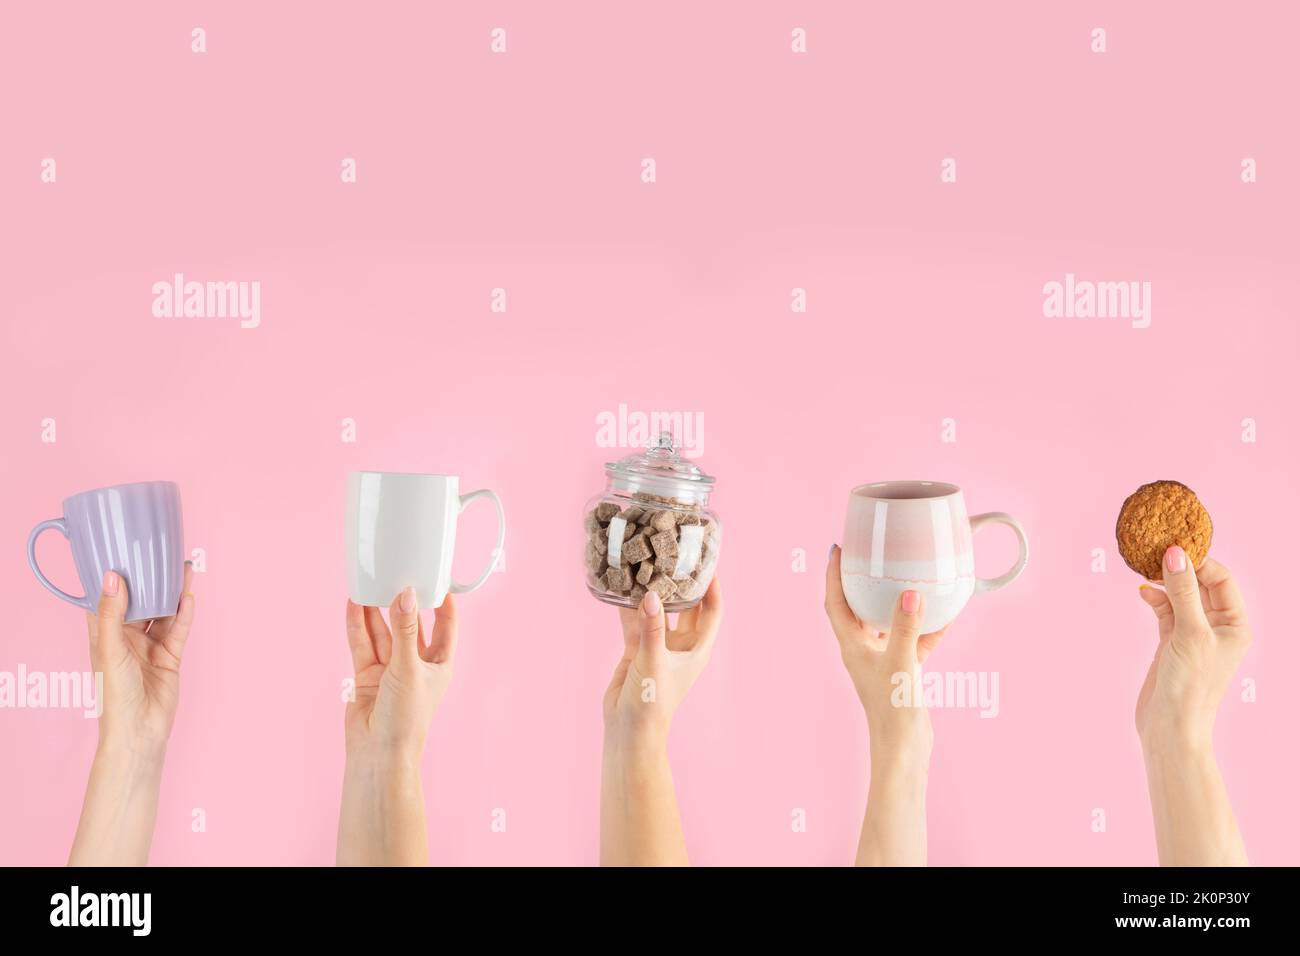 Arms raised up holding coffee cup on pink background. Concept photo. Front view Stock Photo